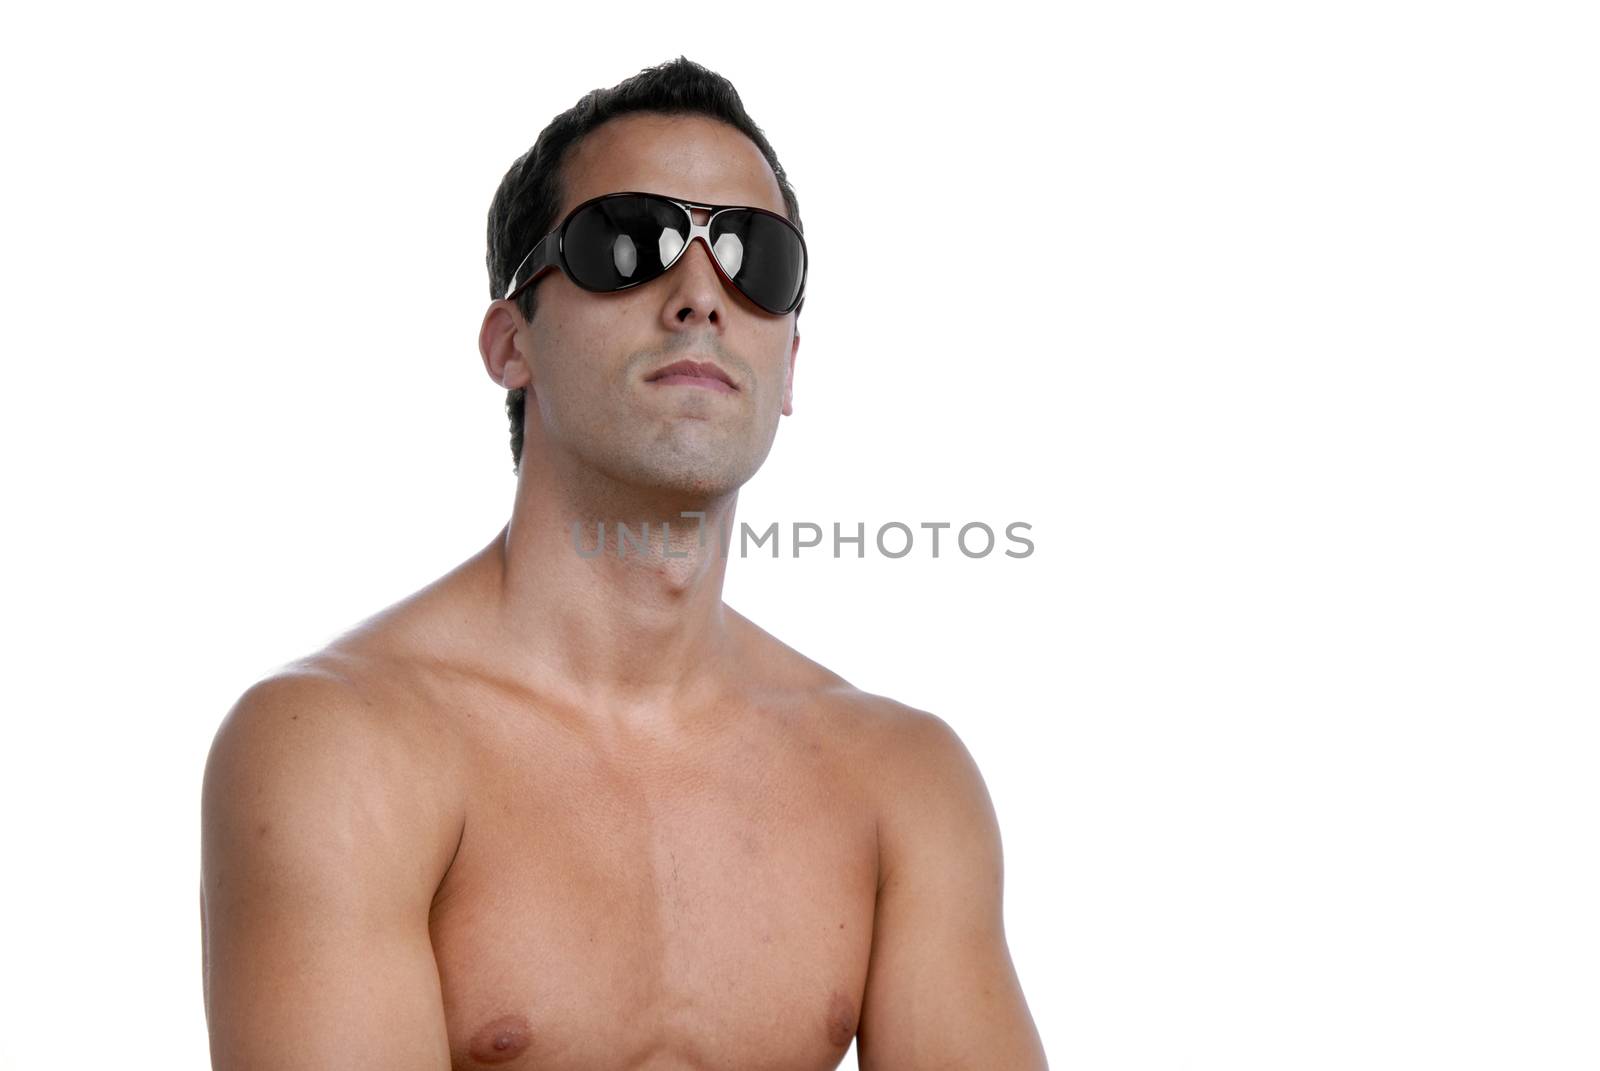 naked muscular male model with sun glasses